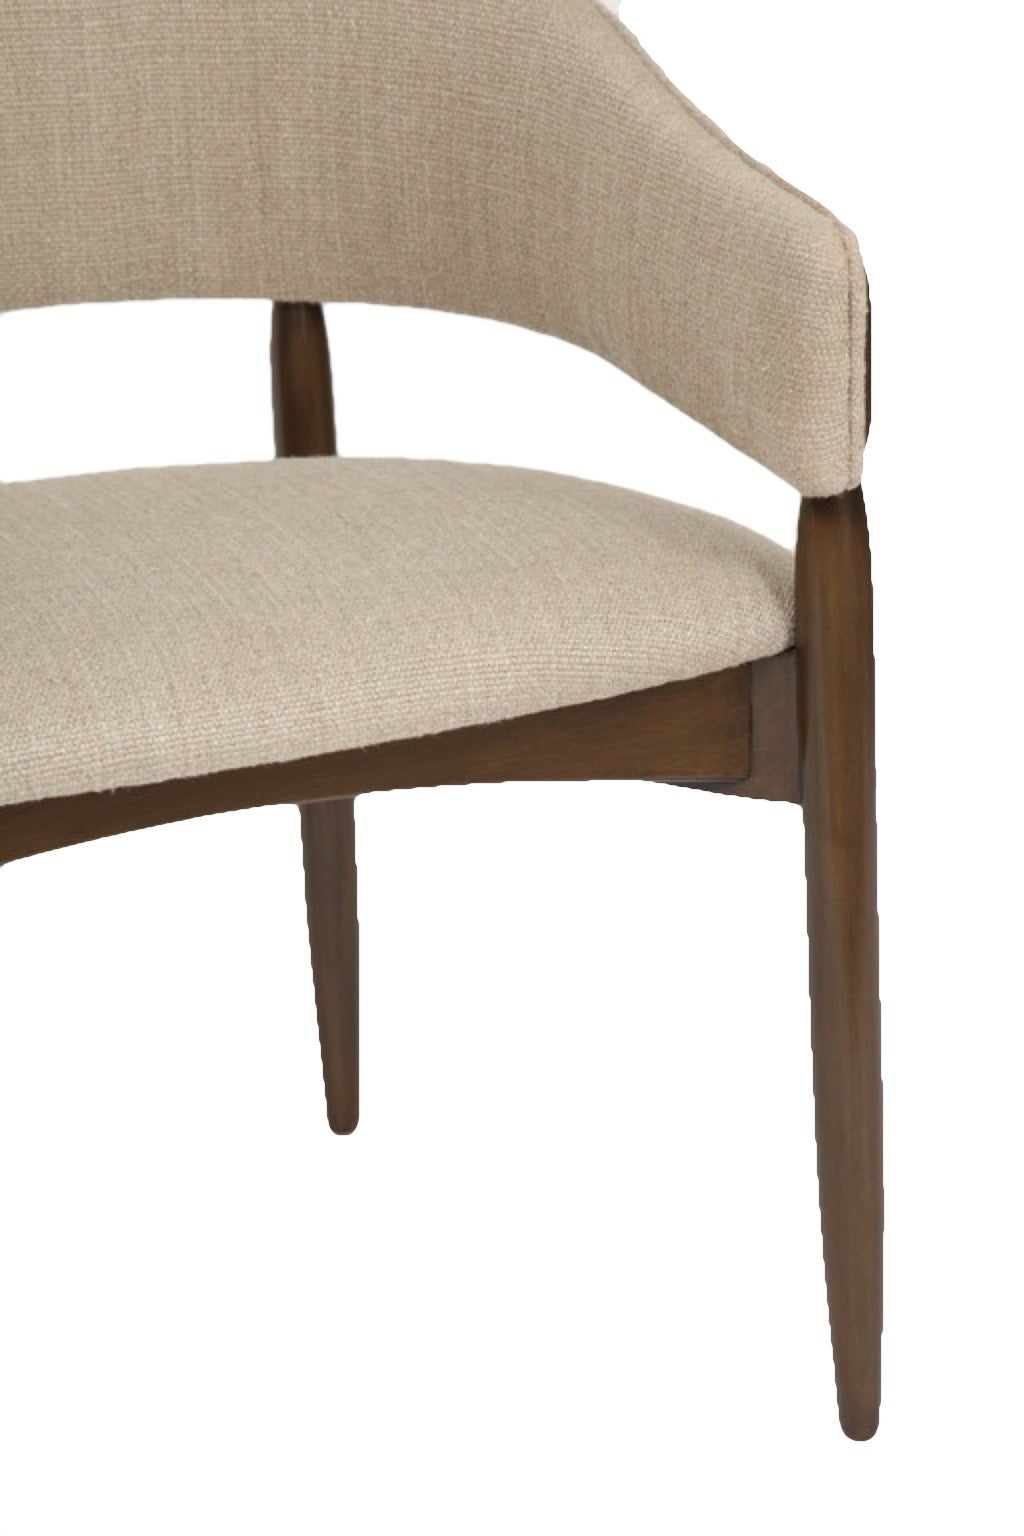 Mid-Century Modern Enroth Dining Chair For Sale